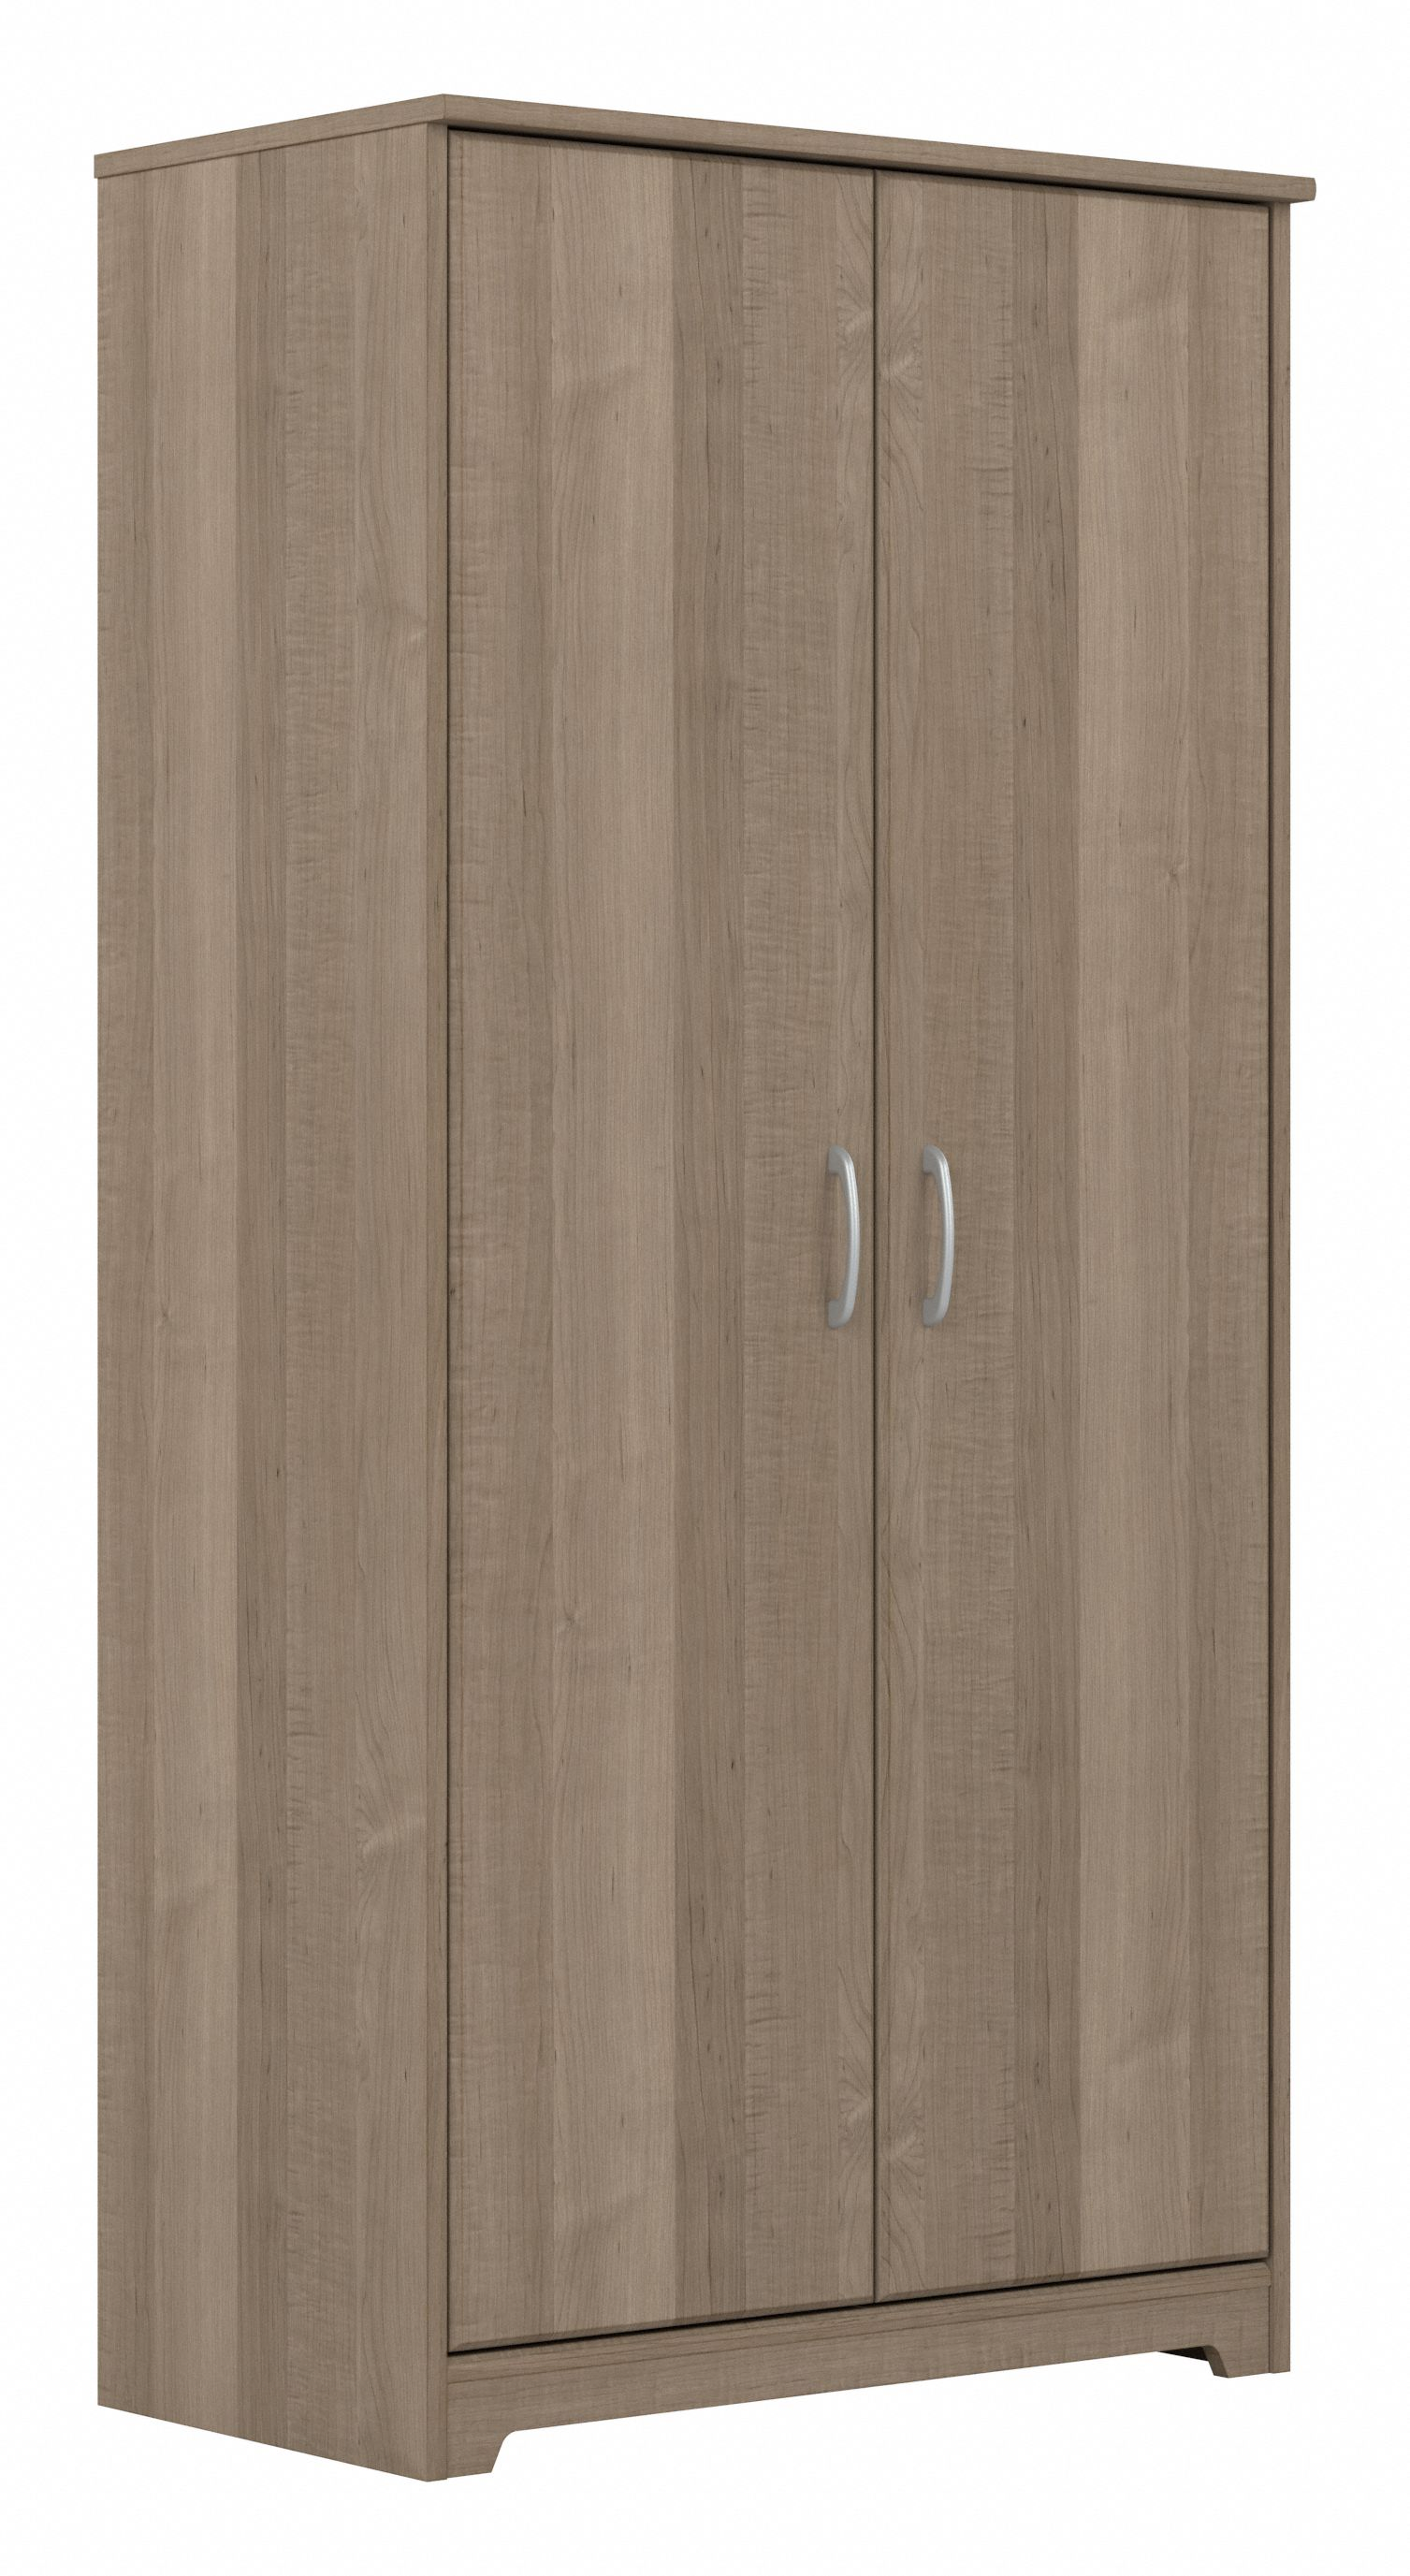 Shop Bush Furniture Cabot Tall Bathroom Storage Cabinet with Doors 02 WC31299-Z1 #color_ash gray